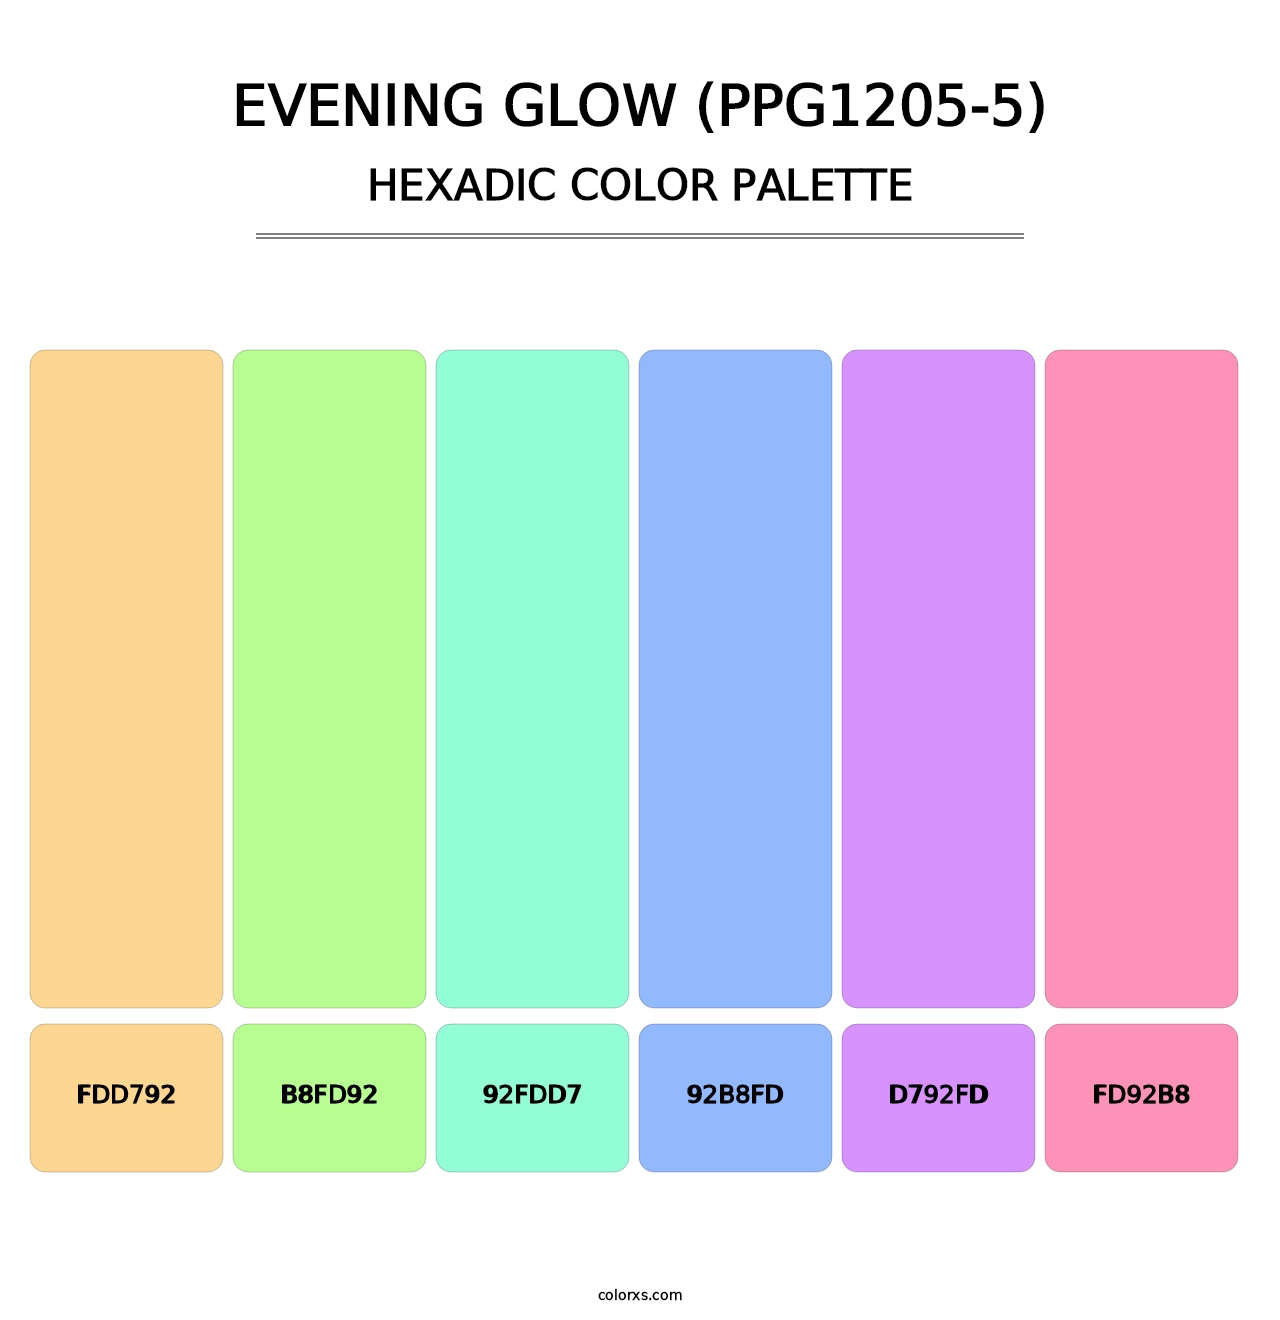 Evening Glow (PPG1205-5) - Hexadic Color Palette